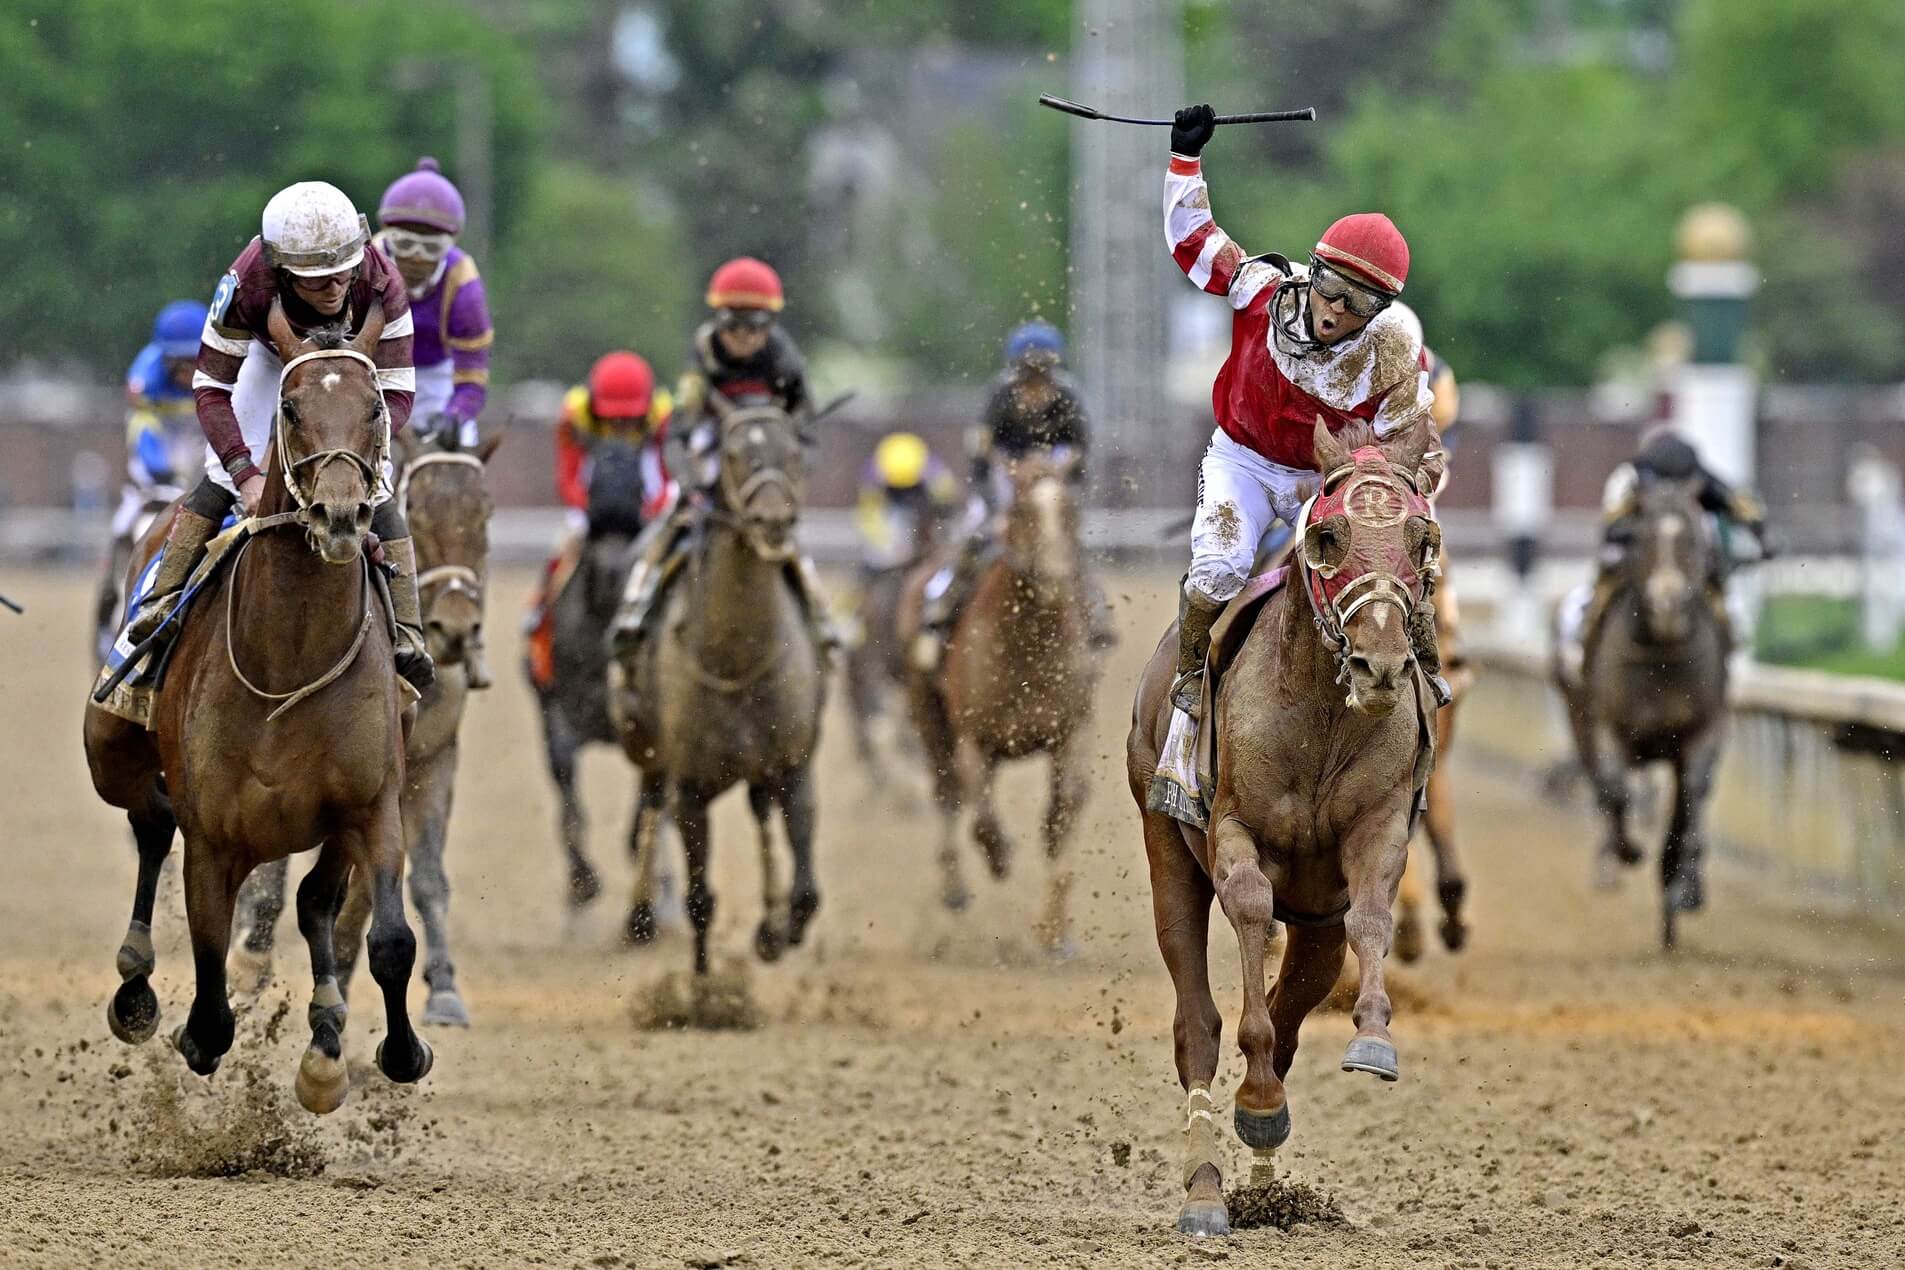 Online Sportsbooks Should and Will Have Horse Racing, Churchill Downs CEO Says